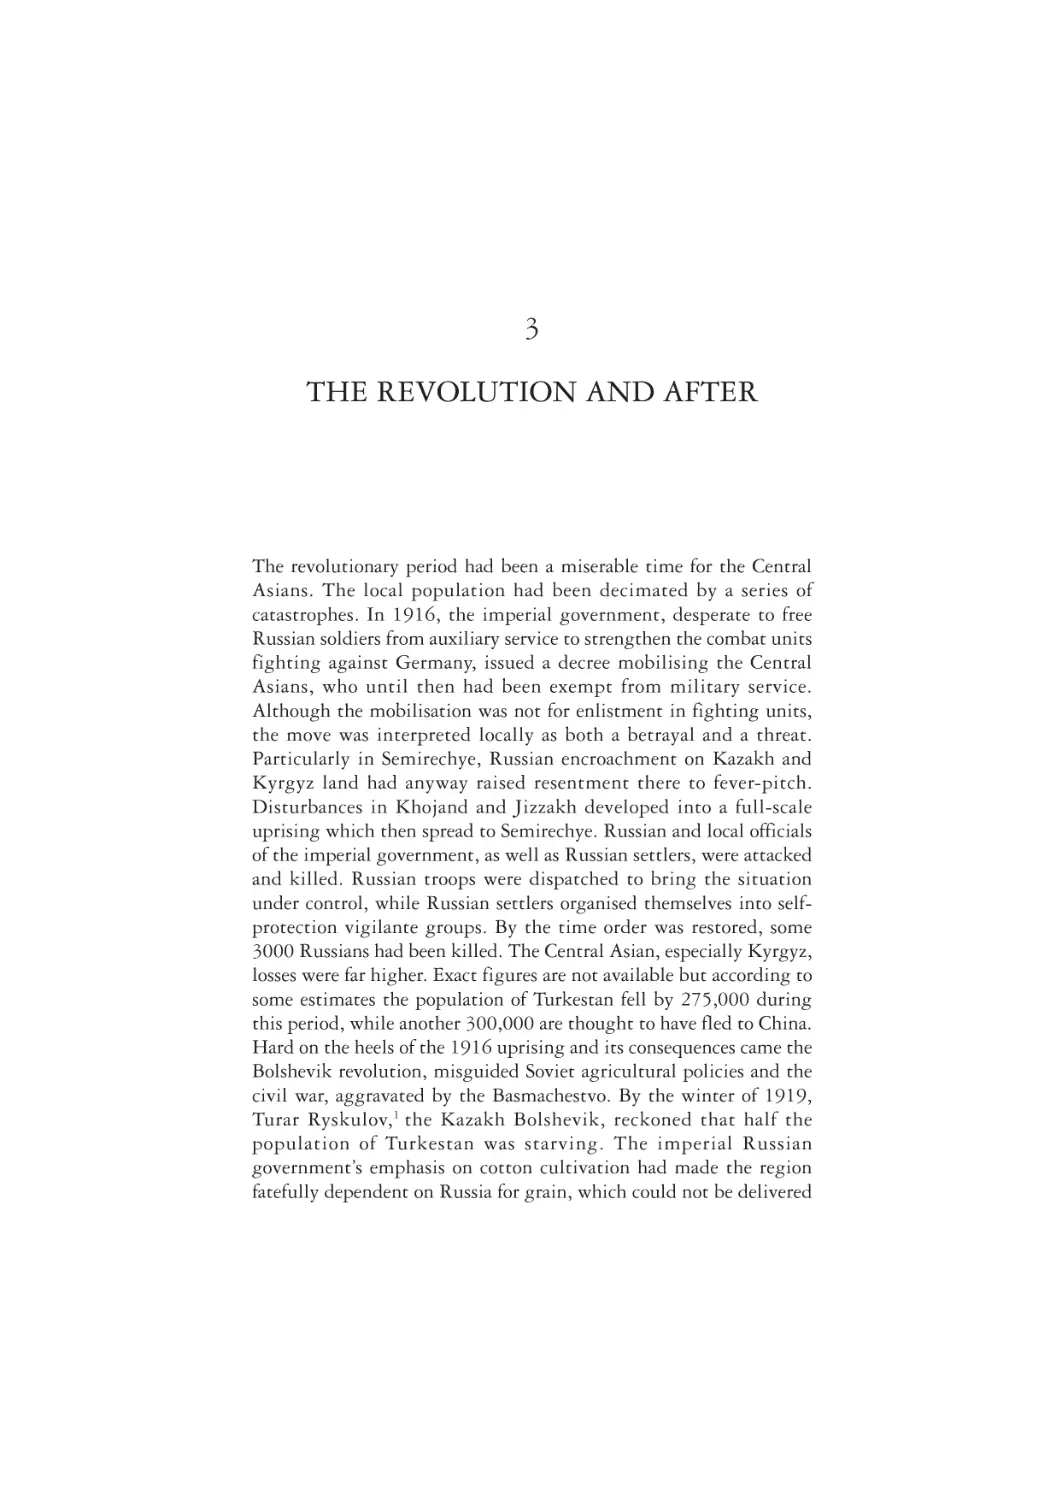 3. The Revolution and After